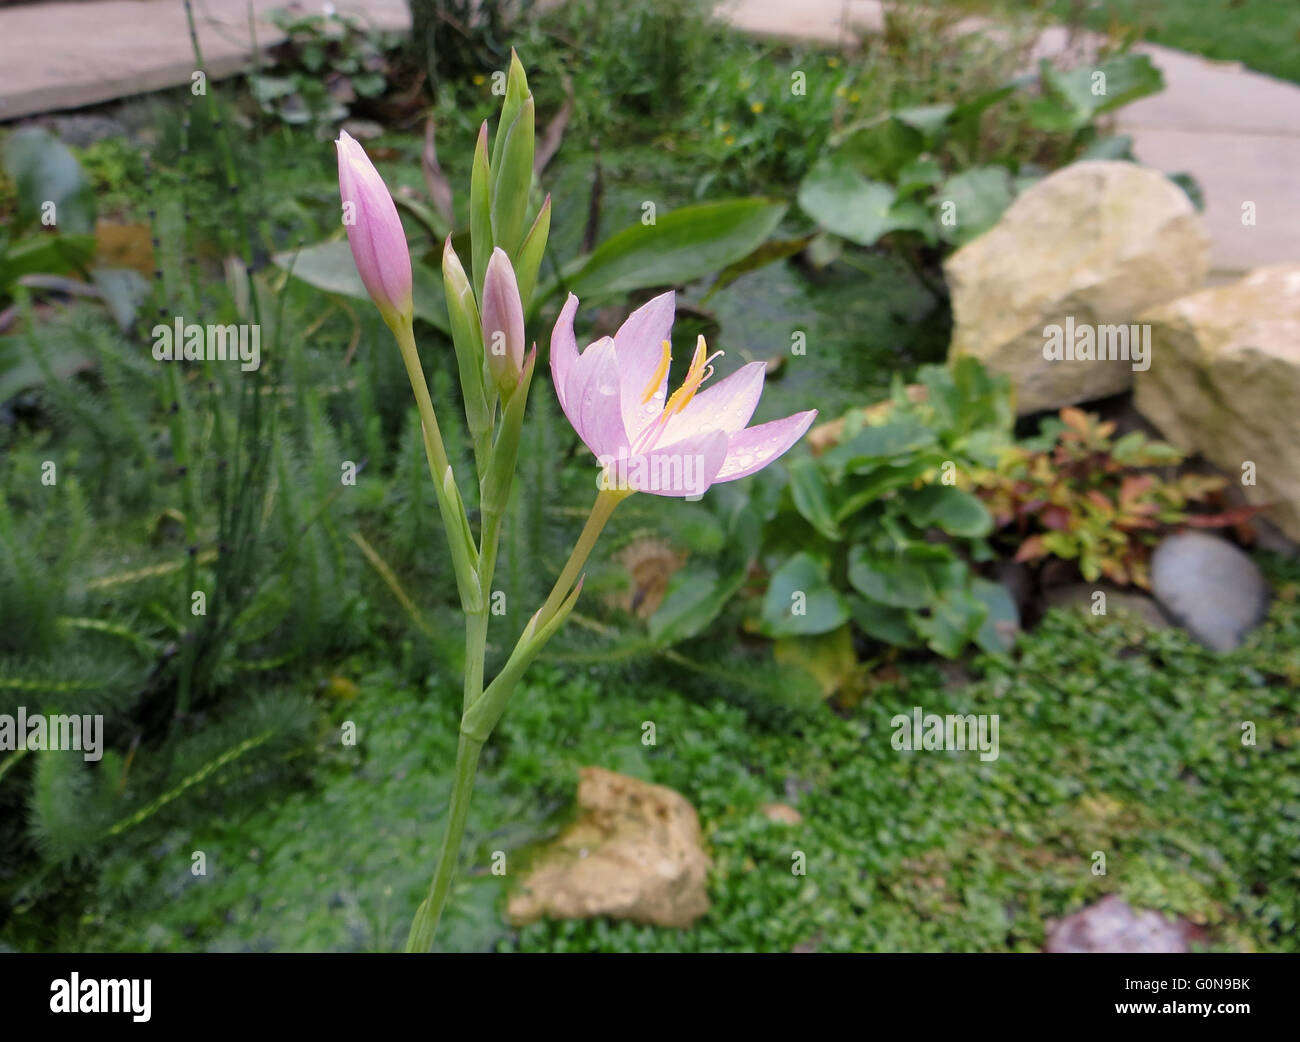 Pink schizostylis (Schizostylis coccinea) flower and buds in garden pond with rocks, pebbles and greenery Stock Photo